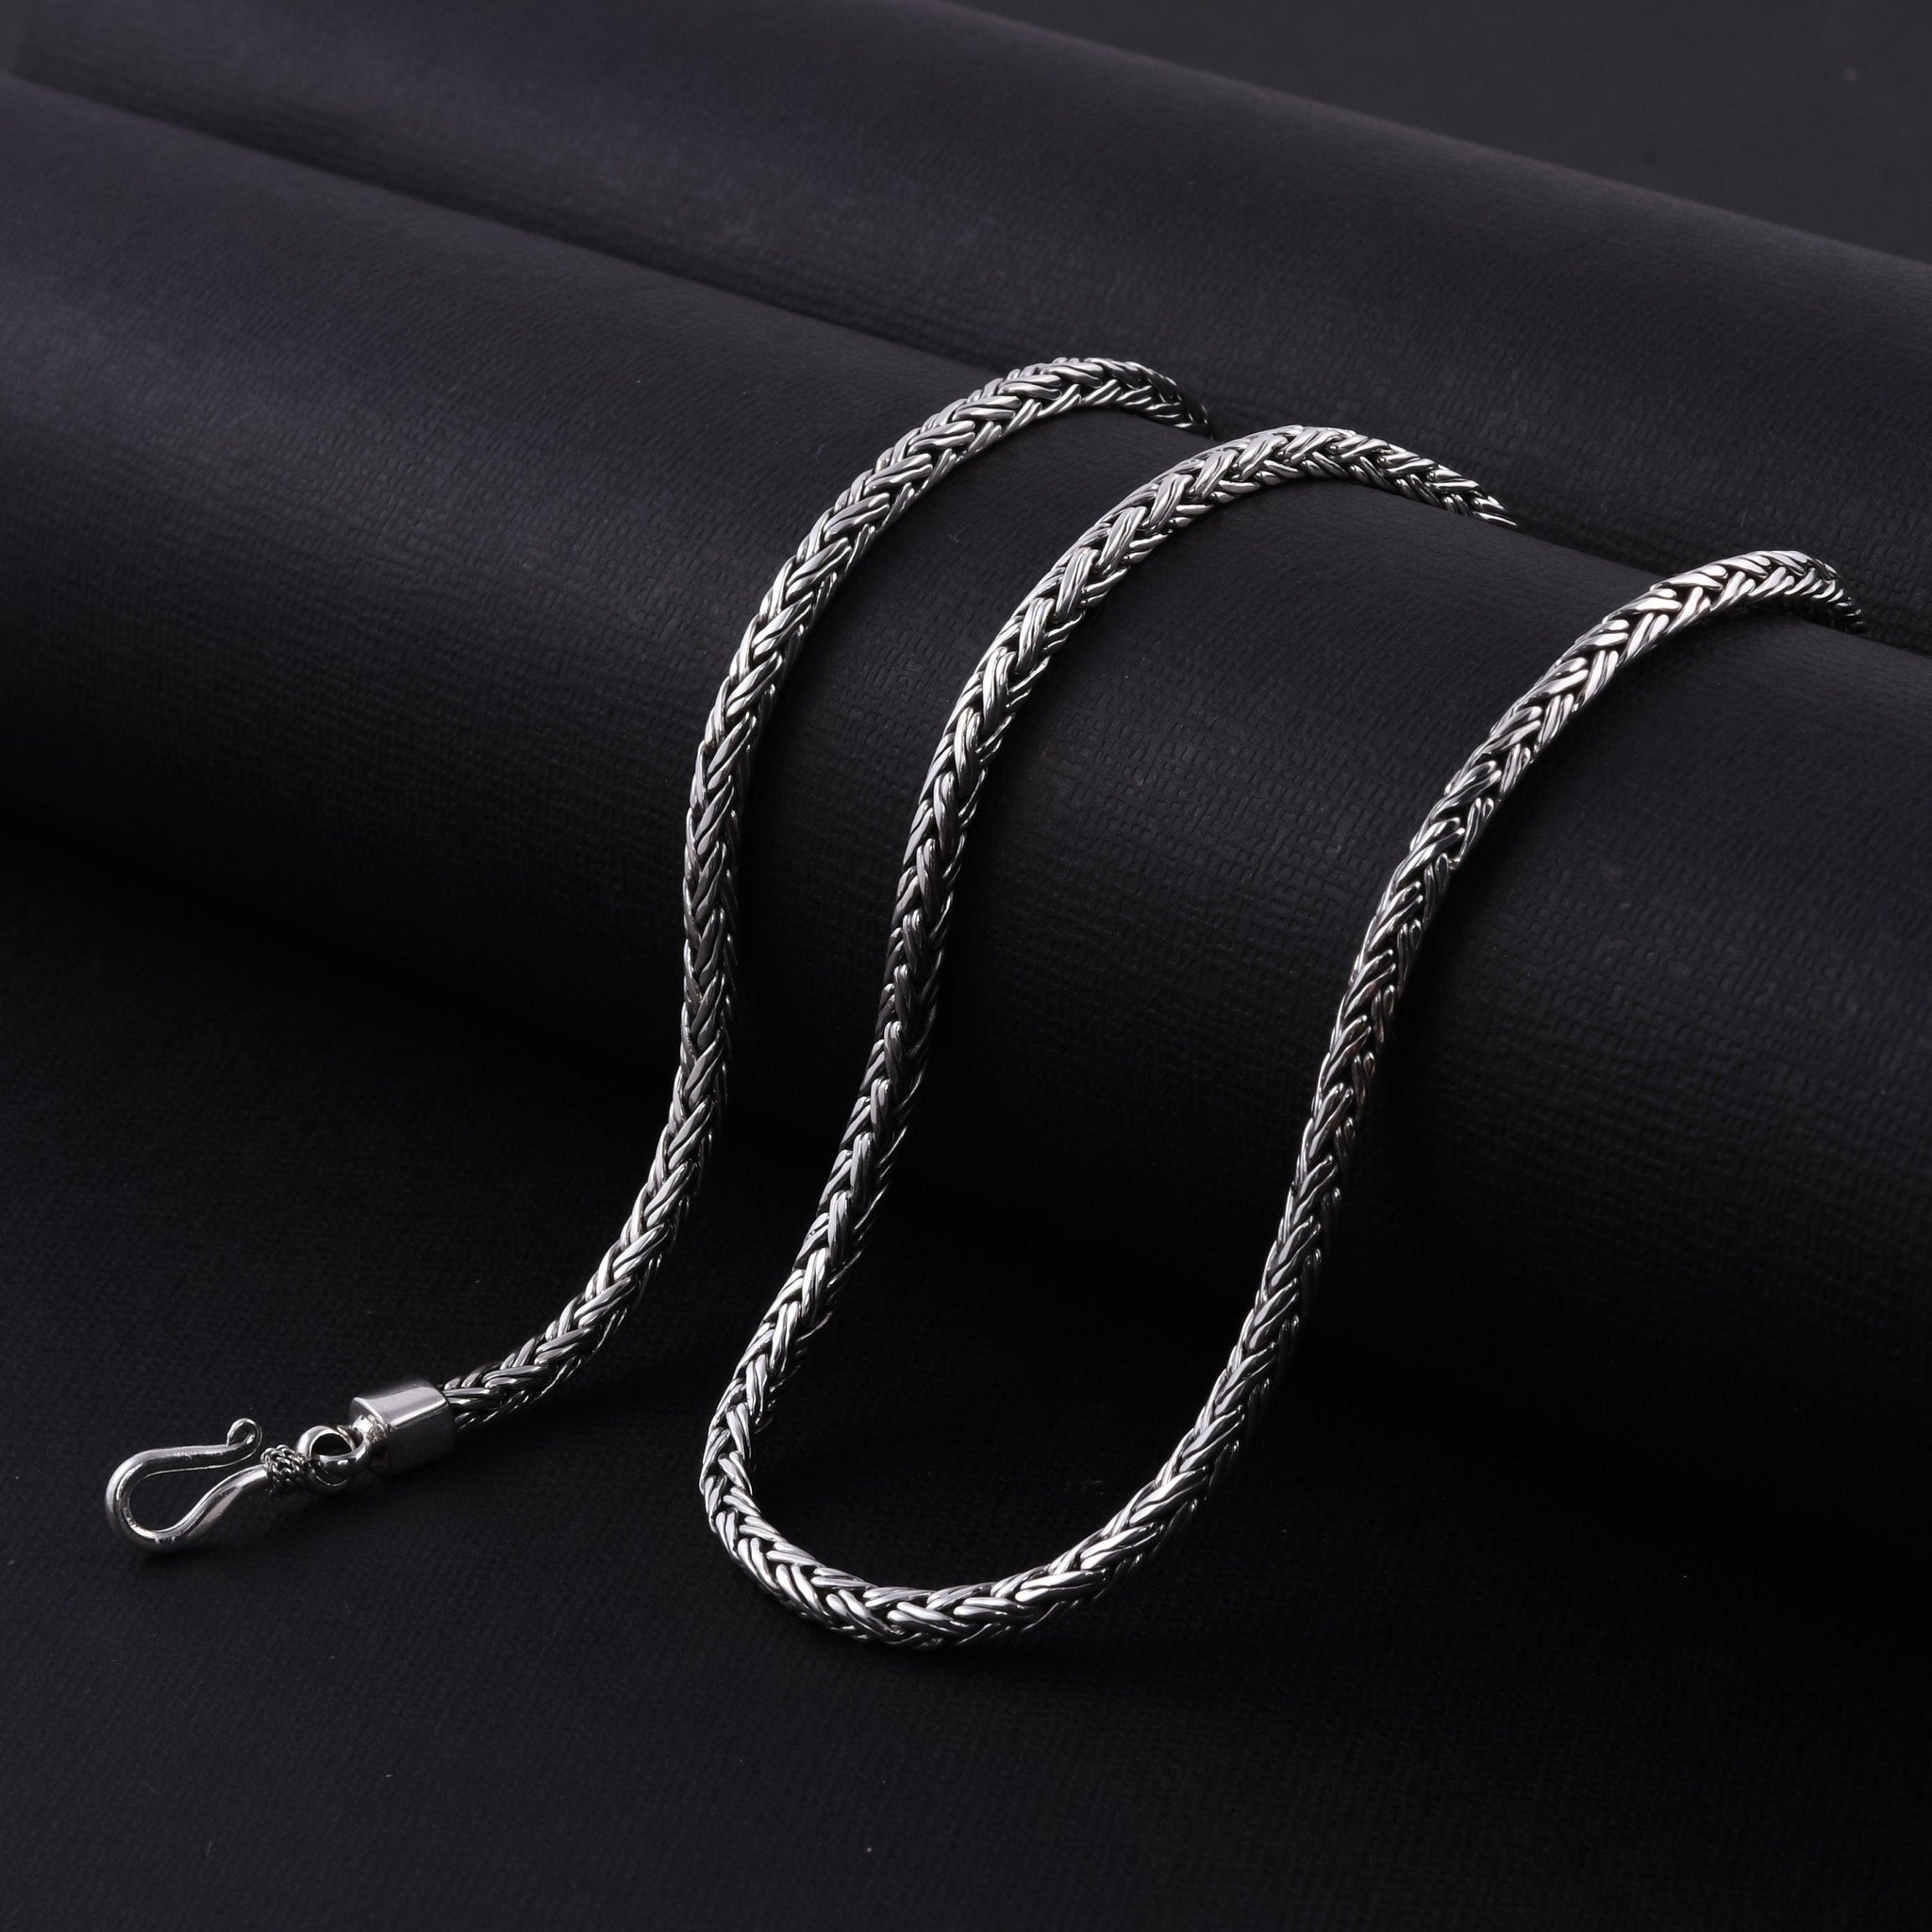 Handmade WHEAT CHAIN Necklace in 925 Sterling Silver 20 Inch 3 mm 31 Grams - Inspiring Jewellery